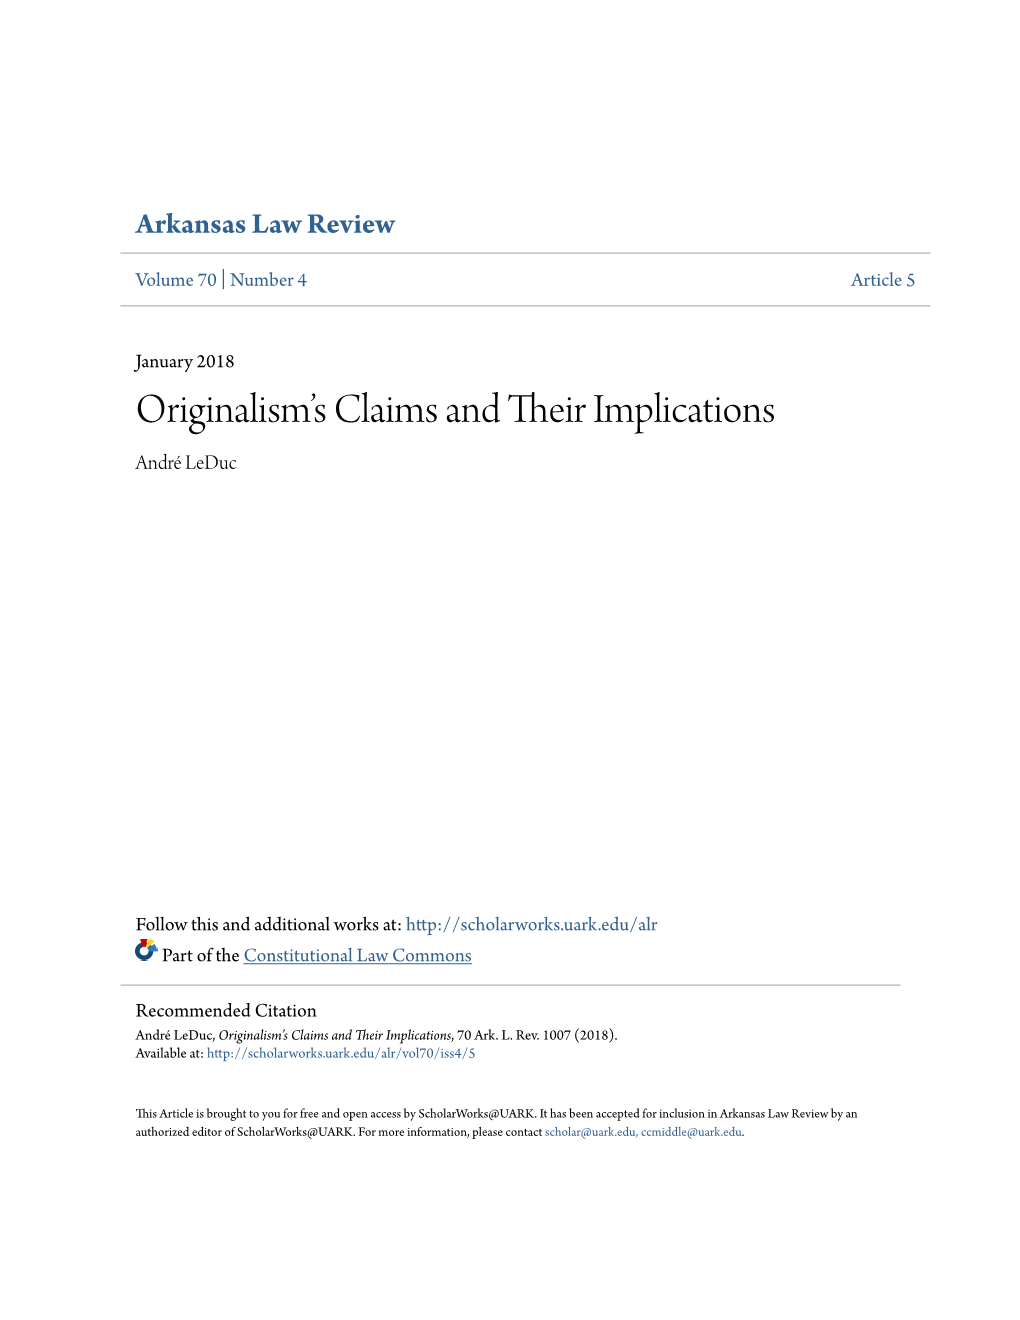 Originalism's Claims and Their Implications